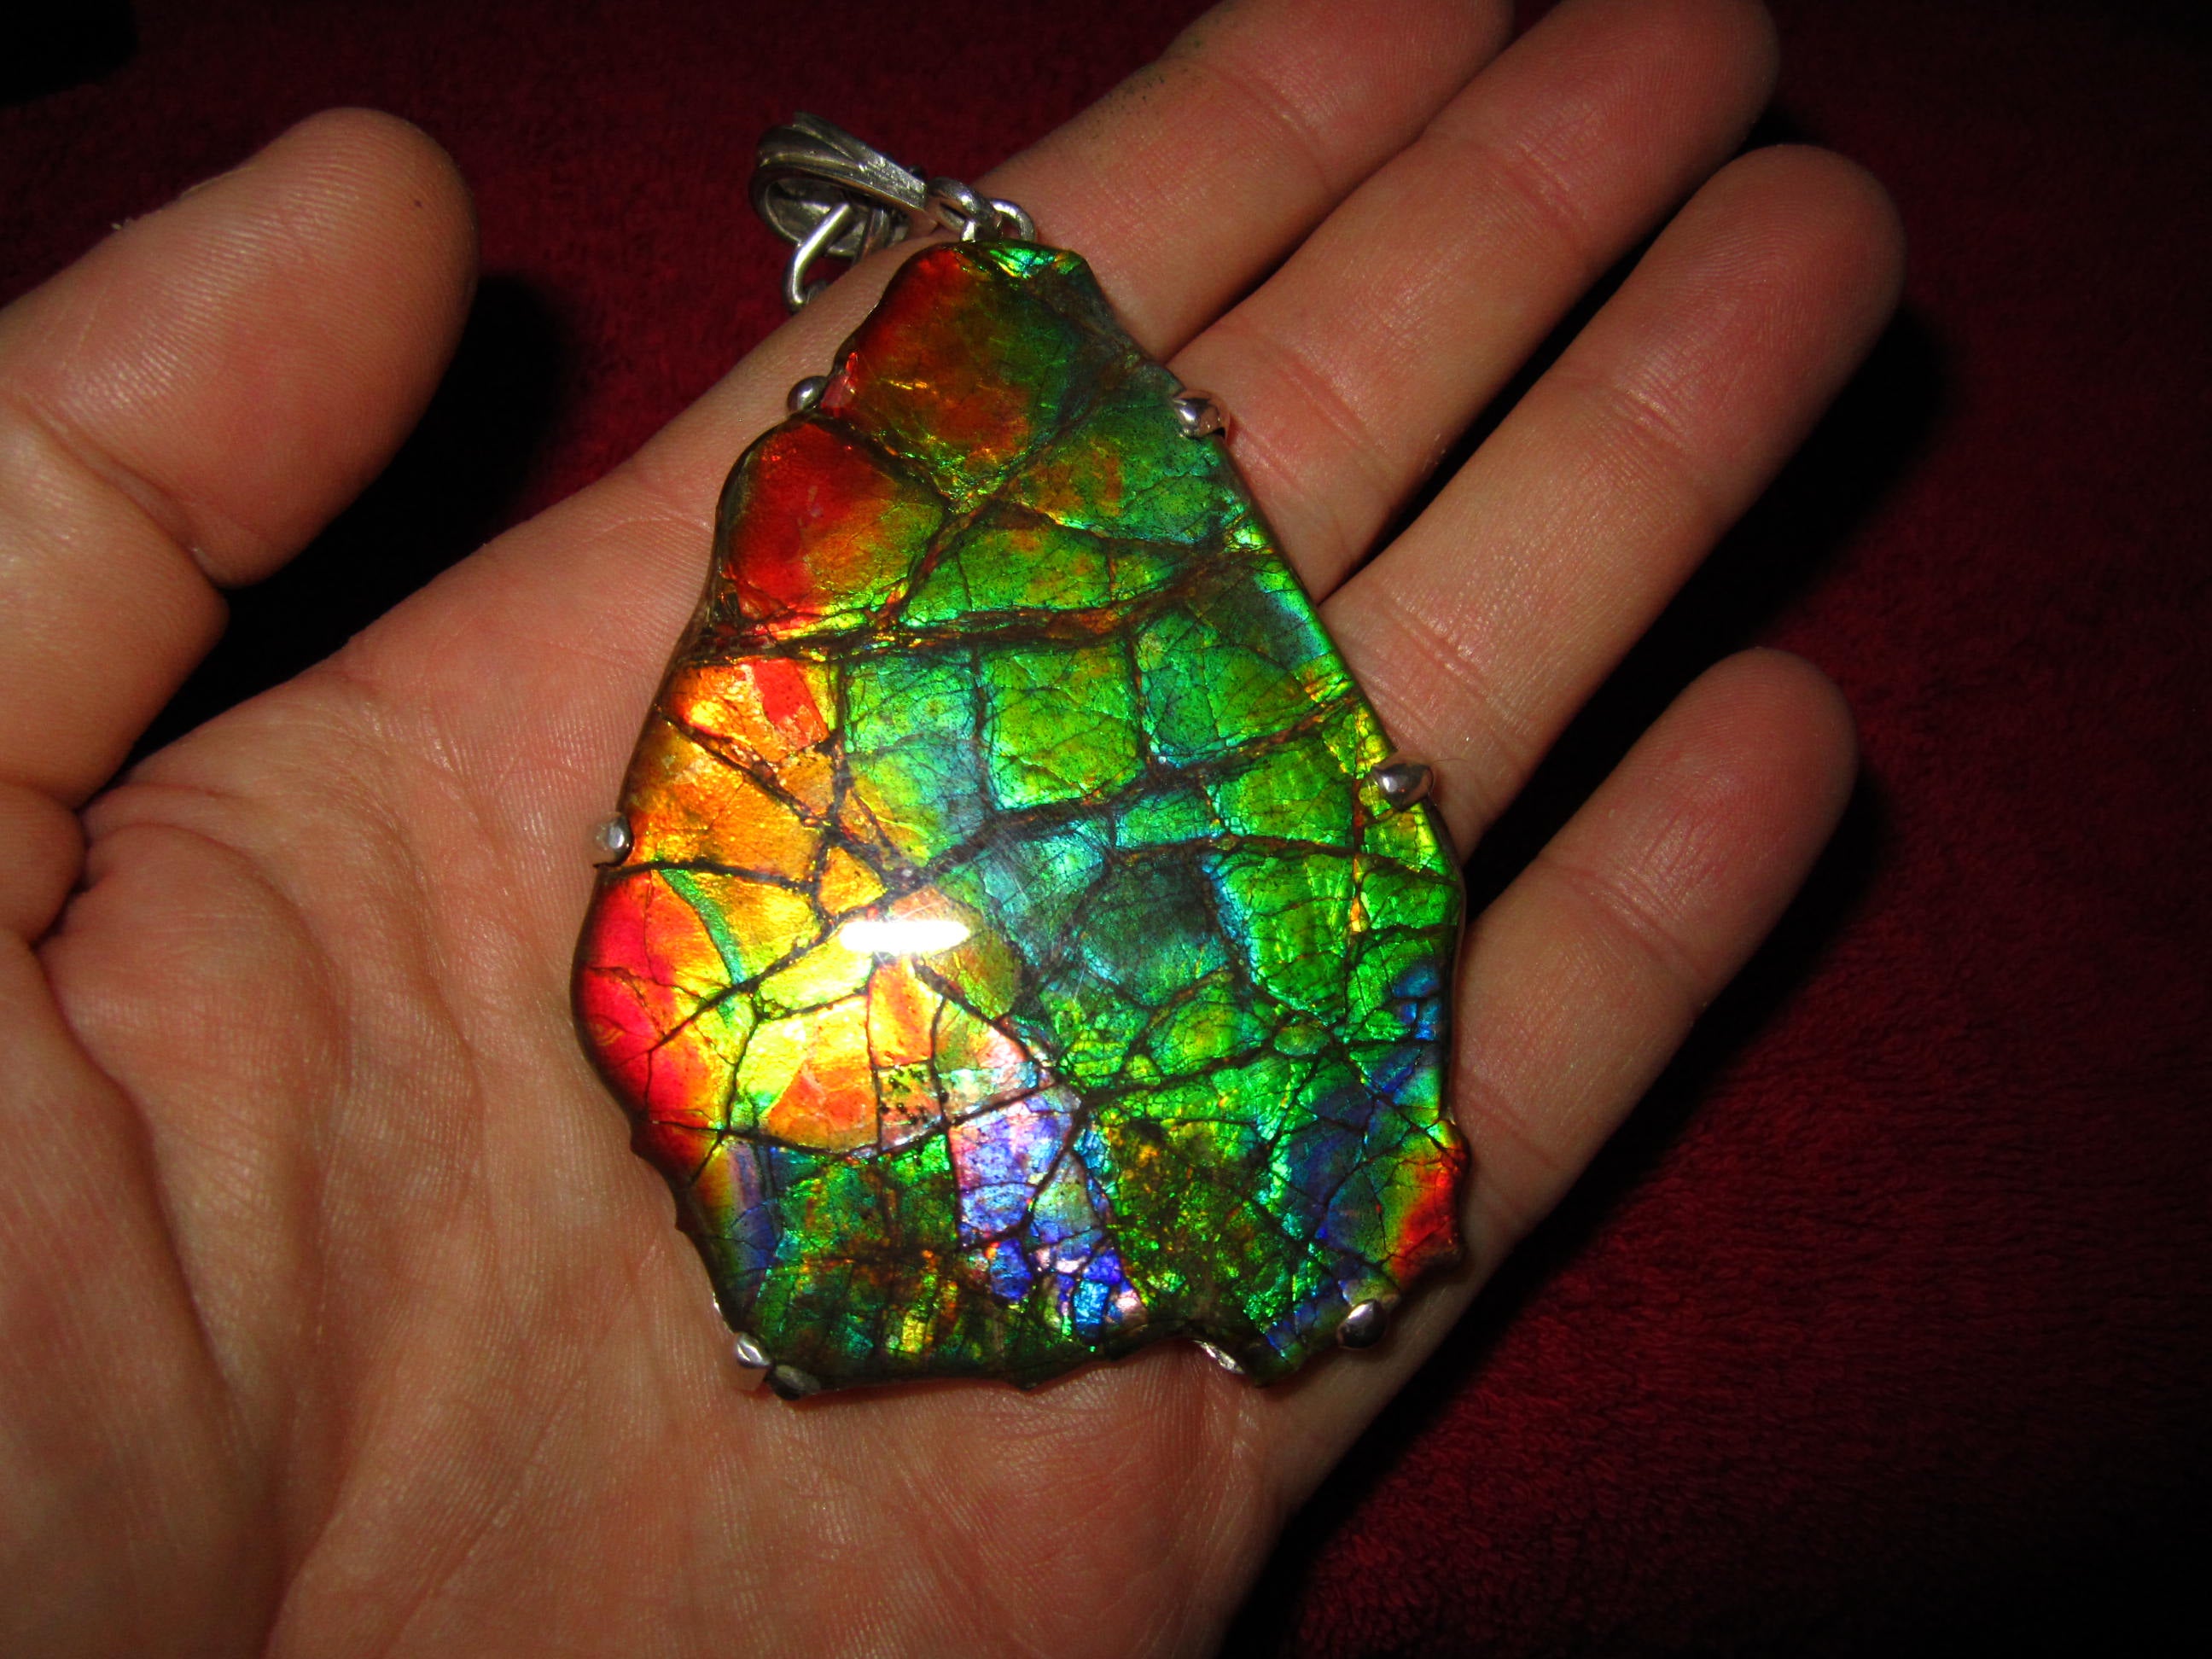 Large amonite pendant made for a friend. Mounting is silver with prngs to hold it in place